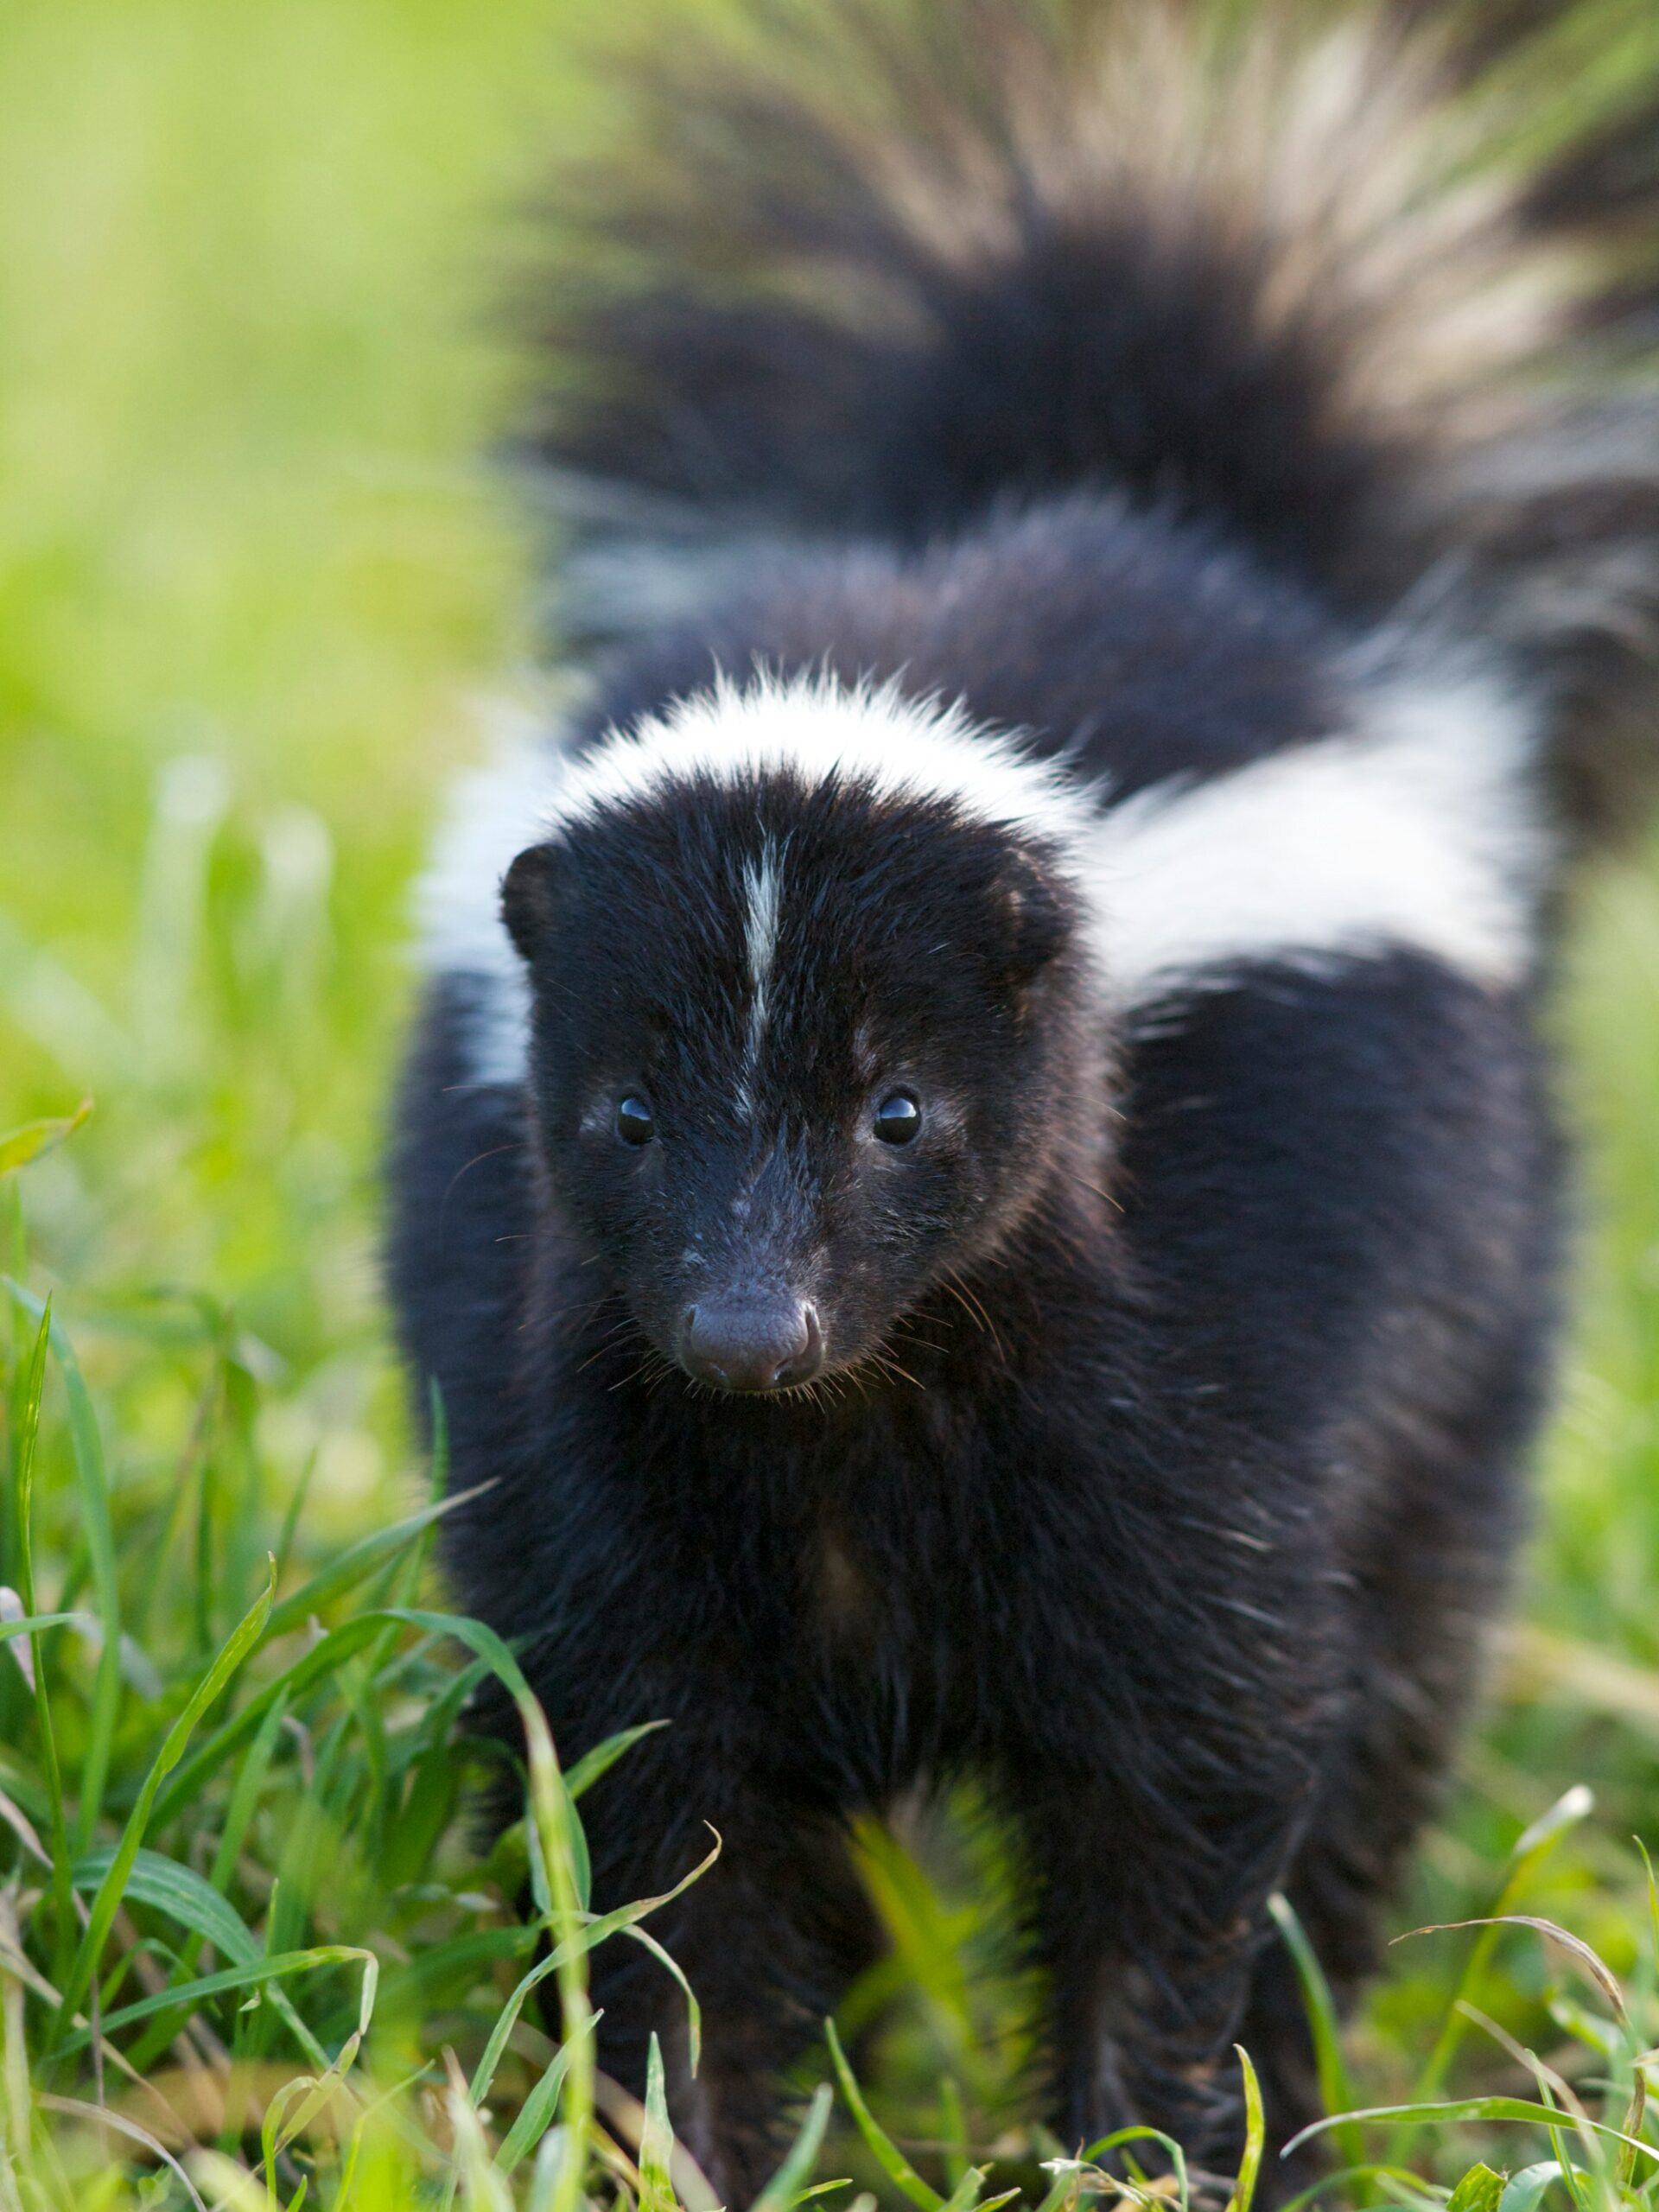 How to Keep Skunks and Wildlife Out of the Yard